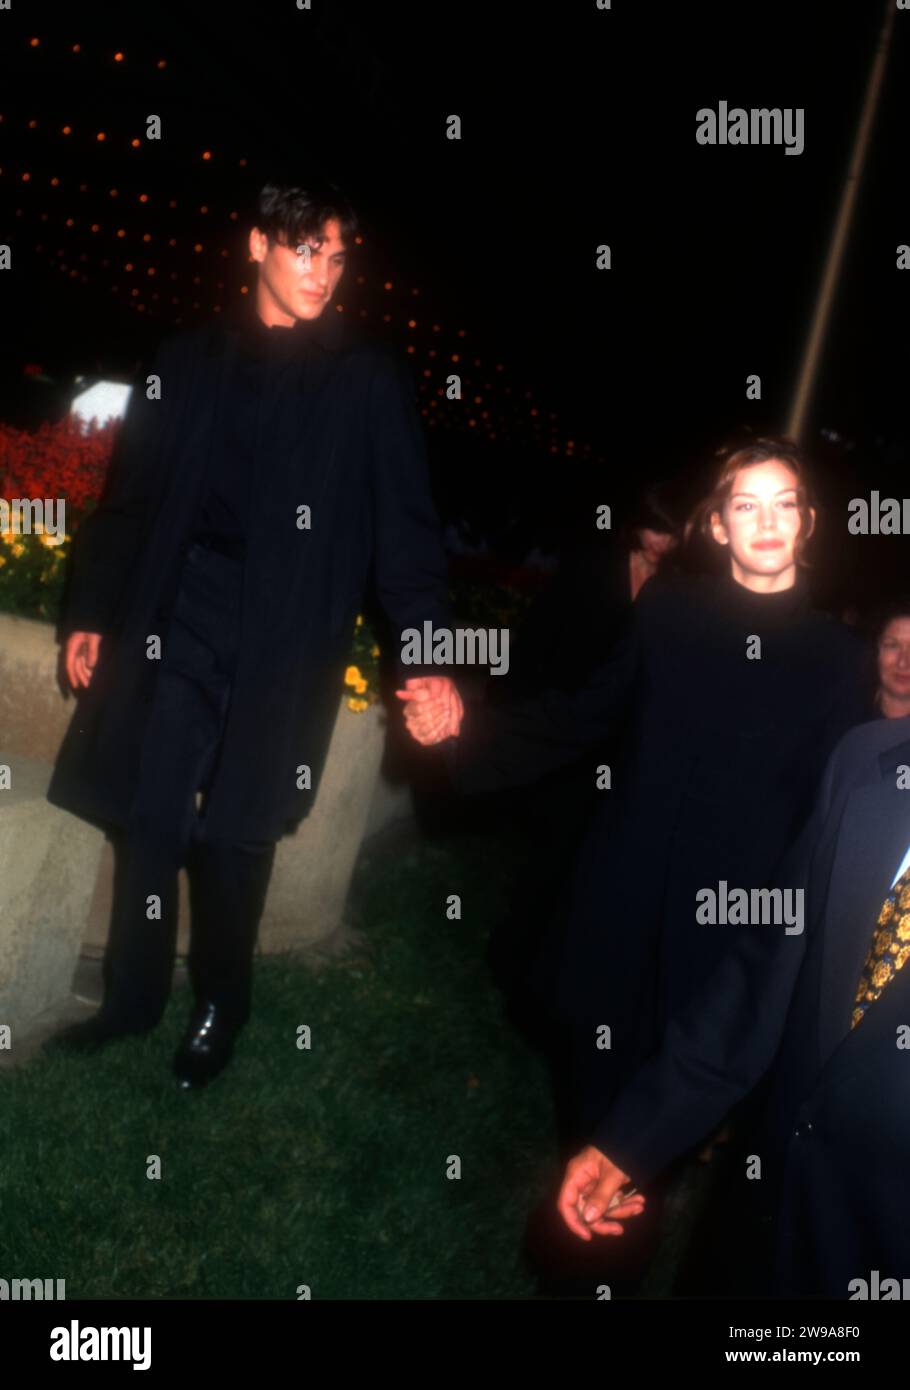 Century City, California, USA 30th September 1996 Actor Joaquin Phoenix and Actress Liv Tyler attend 20th Century StudioÕs ÔThat Thing You DoÕ Premiere at Century City Cineplex Odeon Theaters on September 30, 1996 in Century City, California, USA. Photo by Barry King/Alamy Stock Photo Stock Photo